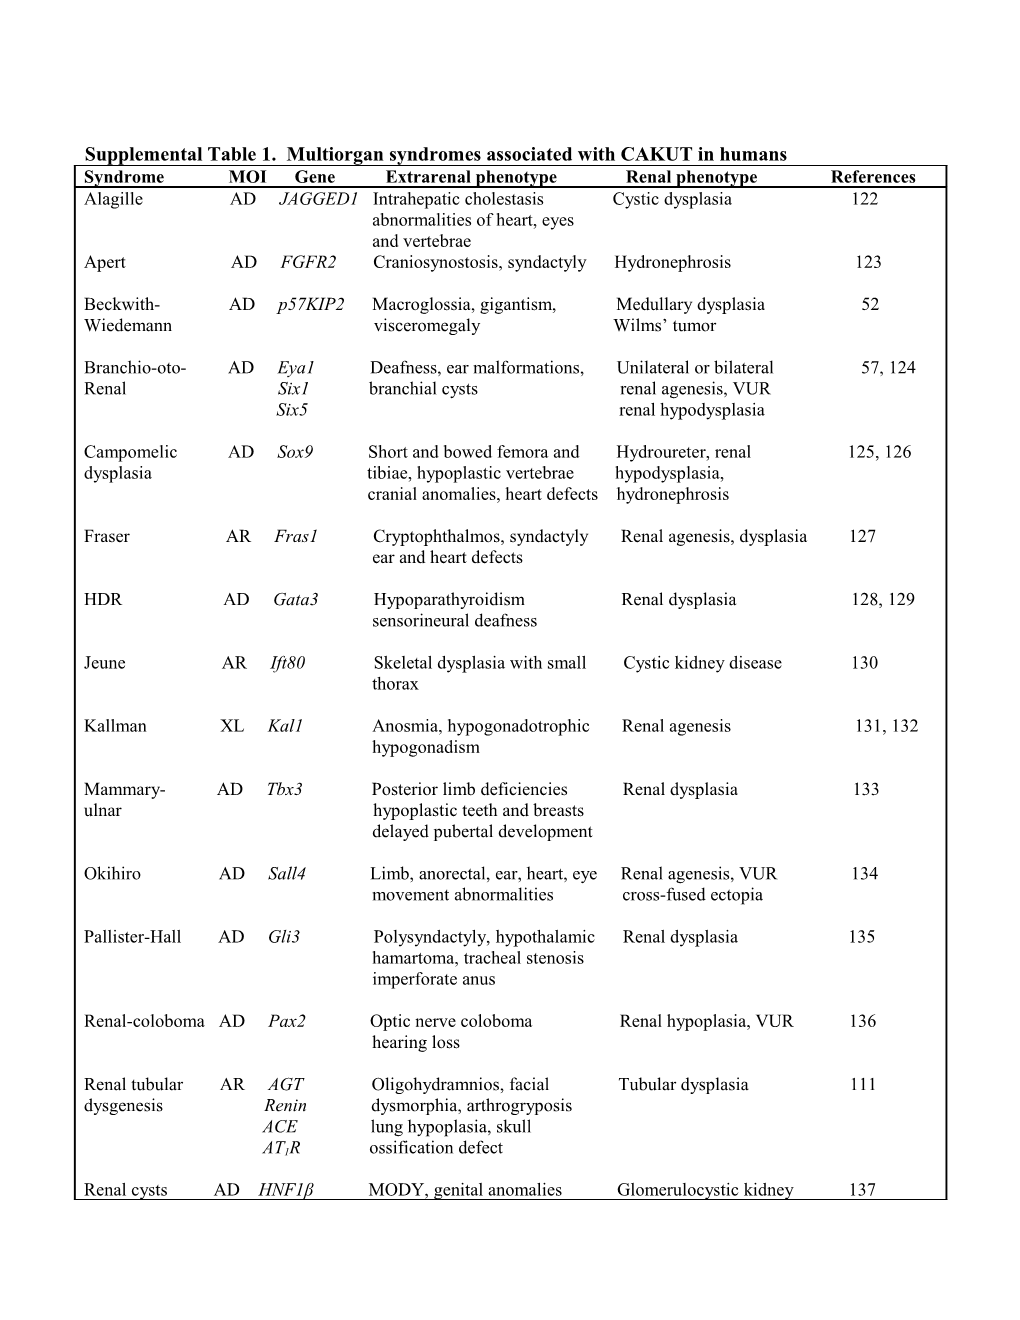 Supplemental Table 1. Multiorgan Syndromes Associated with CAKUT in Humans